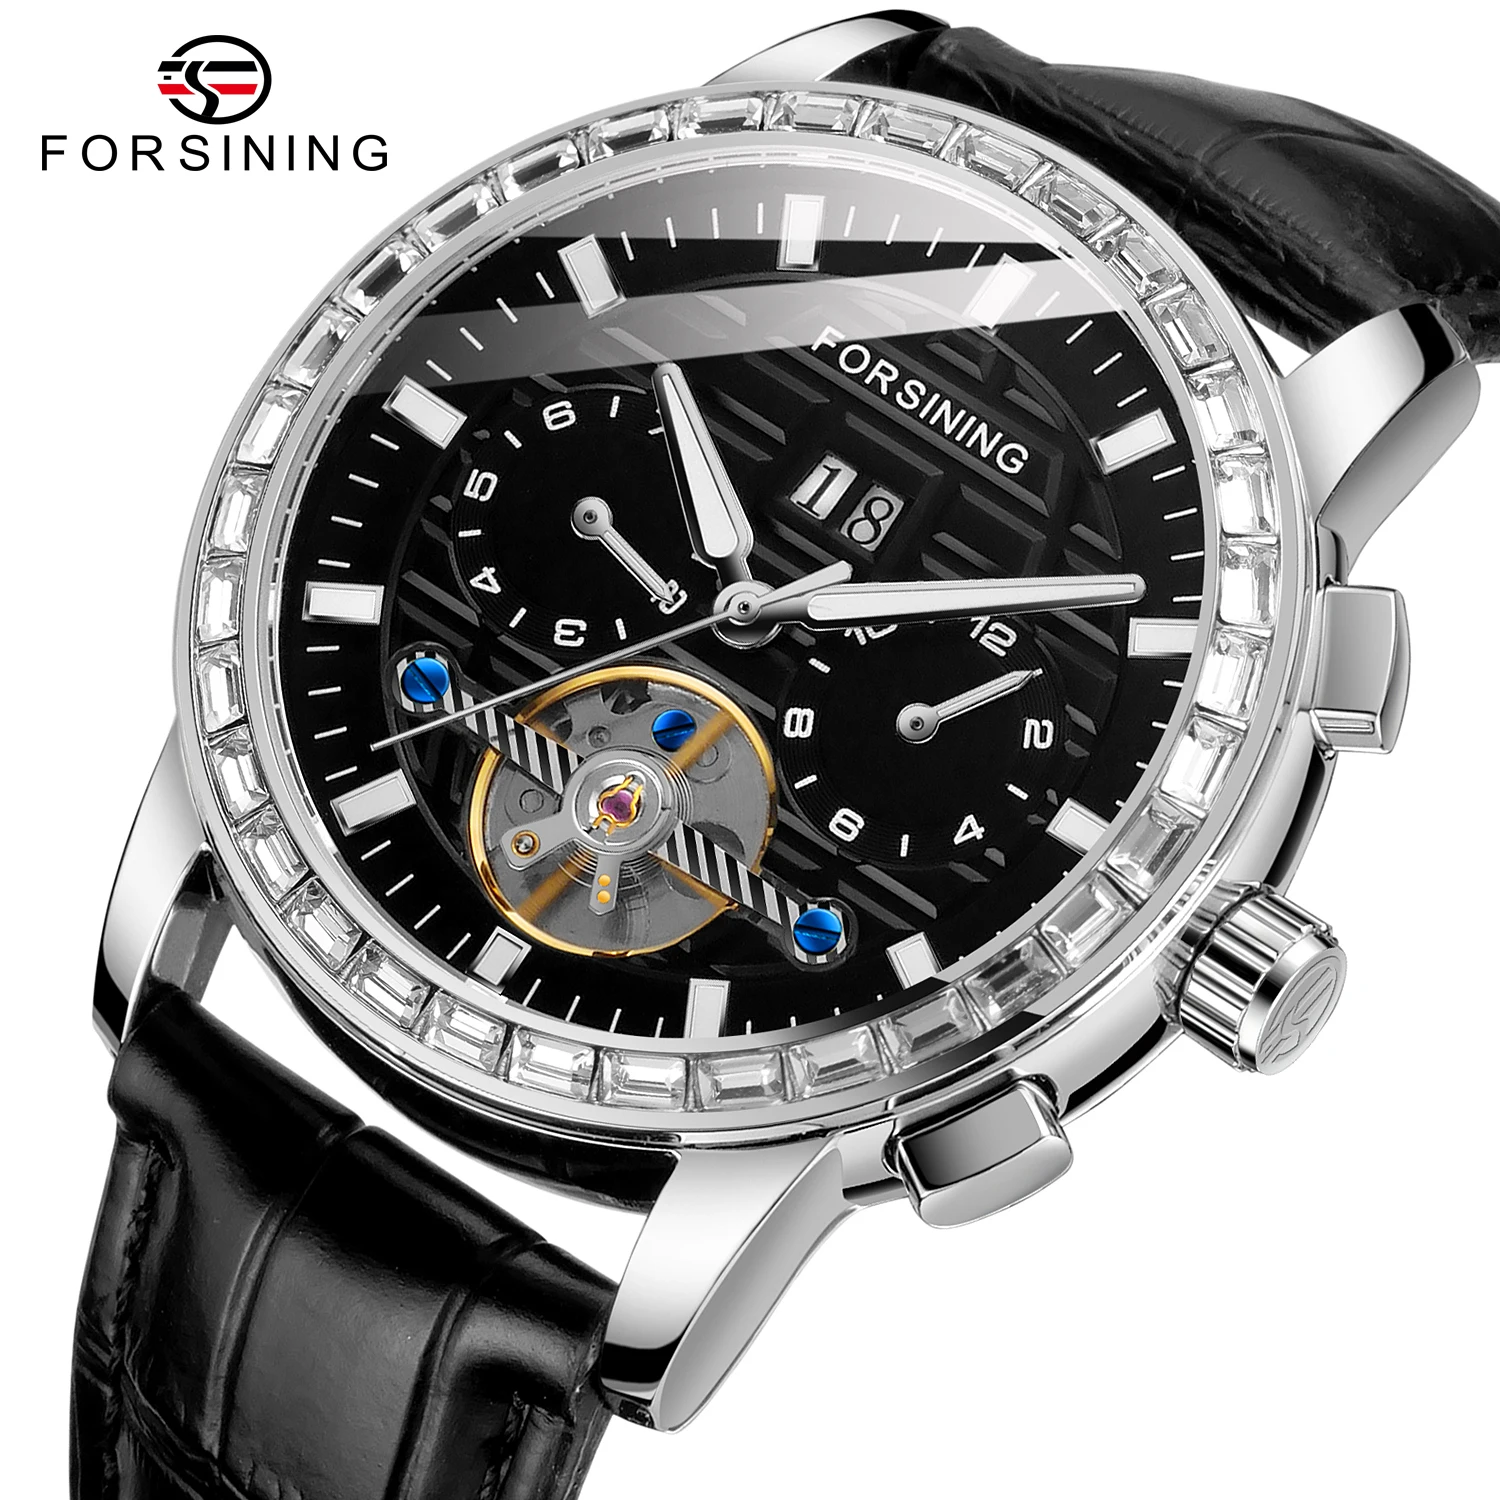 

Forsining Fashion Tourbillon Automatic Skeleton Watch for Men Week Display Sub-Dials Luxury Mechanical Watches Leather Strap New